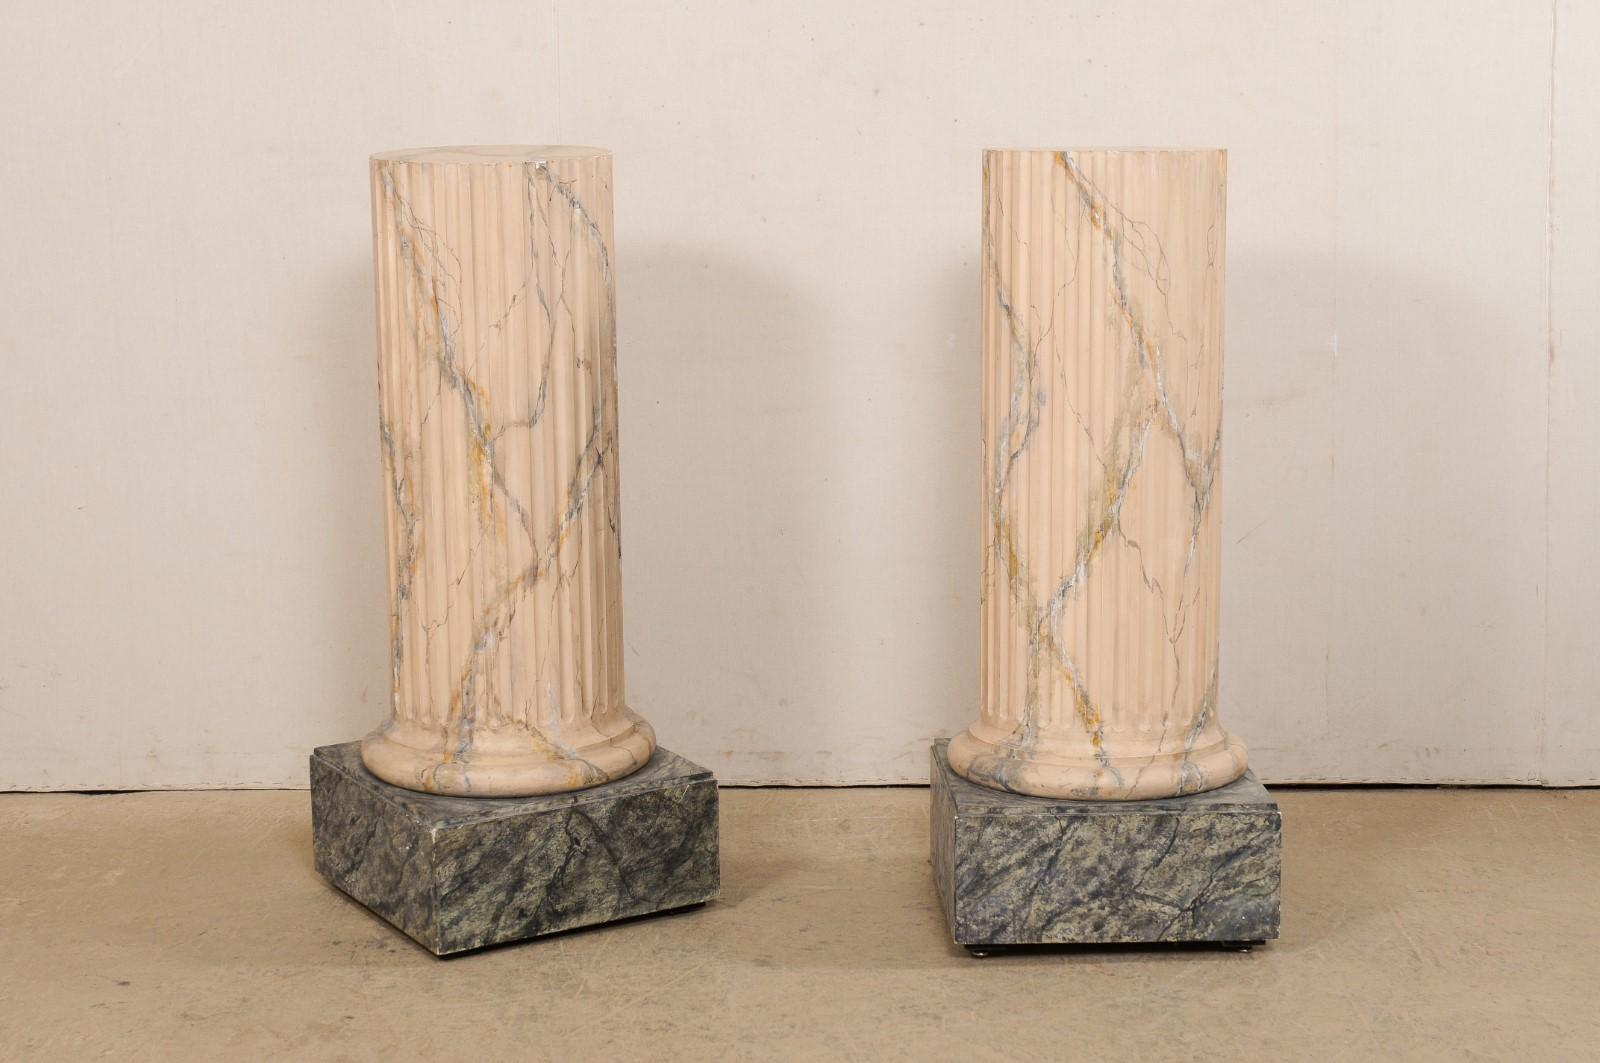 An Italian pair of carved-wood fluted column pedestals, with their original faux marble painted finish, from the mid 20th century. This pair of pedestals are circular-shaped, with flat tops measuring 15.25